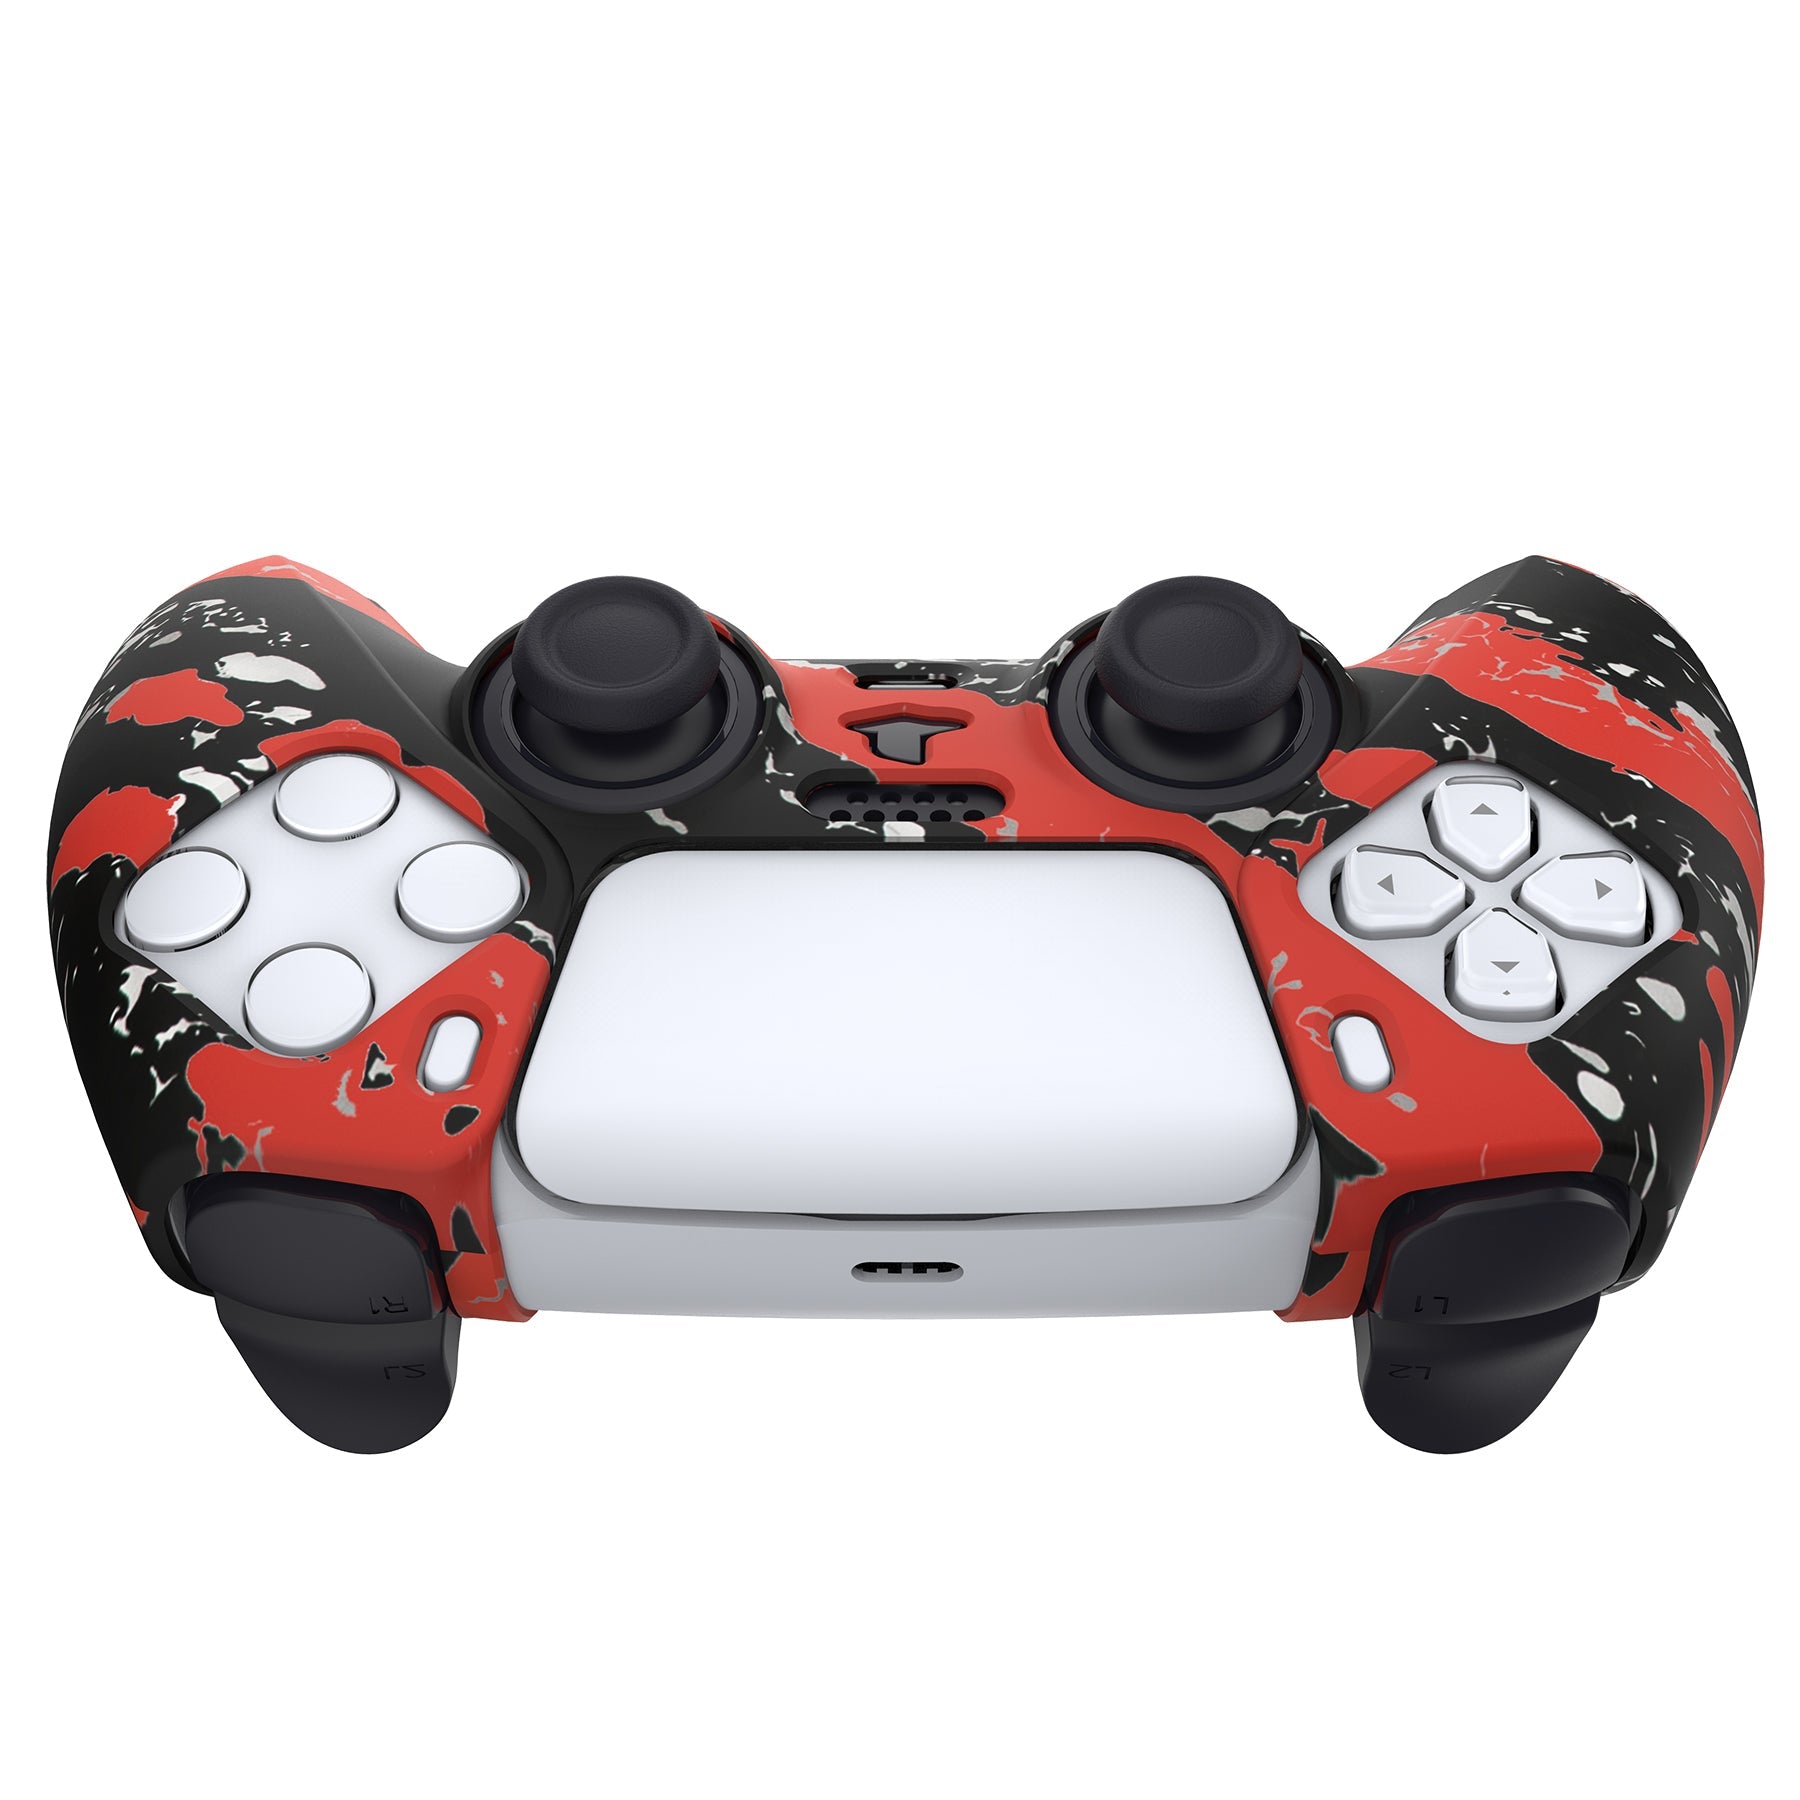 PlayVital Water Transfer Printing Red Splash Patterned Anti-Slip Silicone Cover Skin Soft Rubber Case Protector for PS5 Controller with 6 Thumb Grip Caps - KOPF021 PlayVital